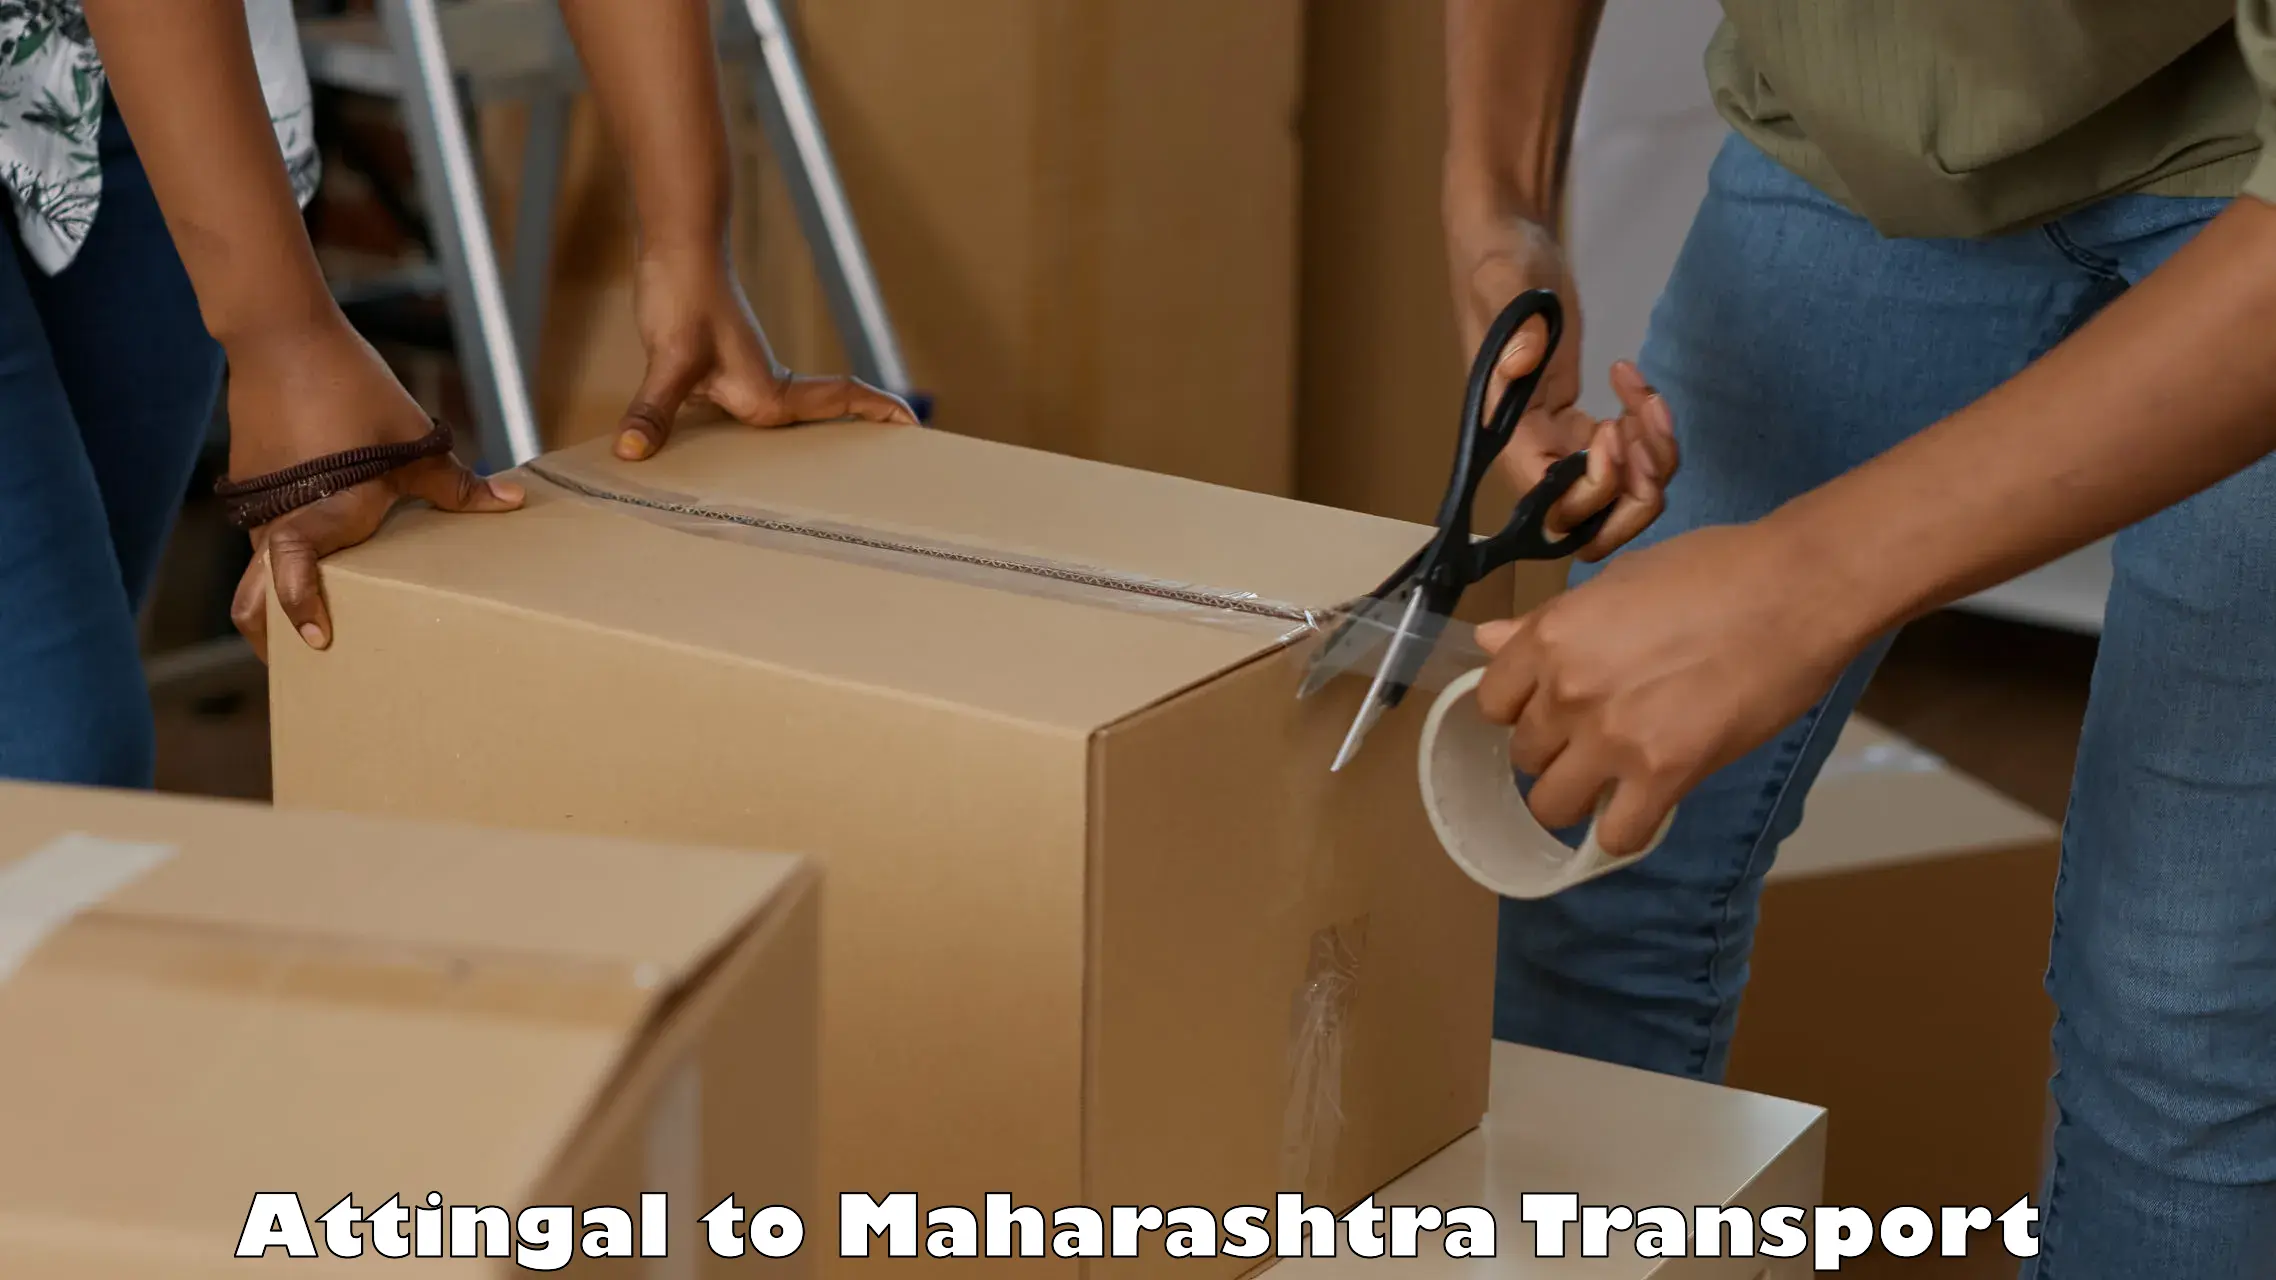 Transport bike from one state to another Attingal to Maharashtra